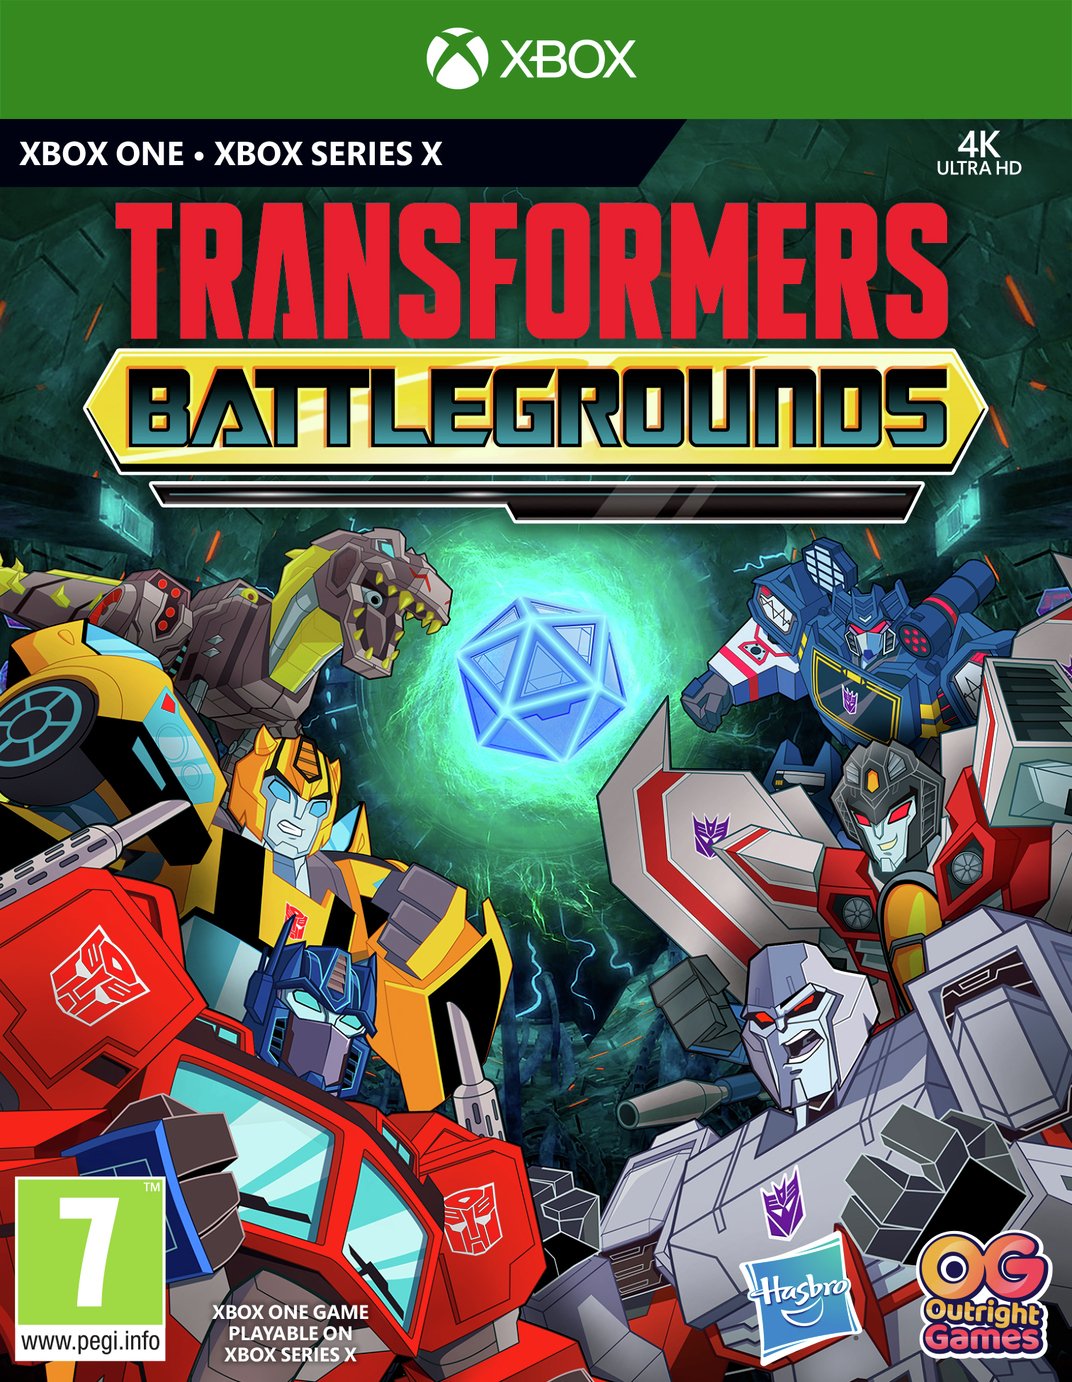 Transformers: Battlegrounds Xbox One Game Pre-Order Review